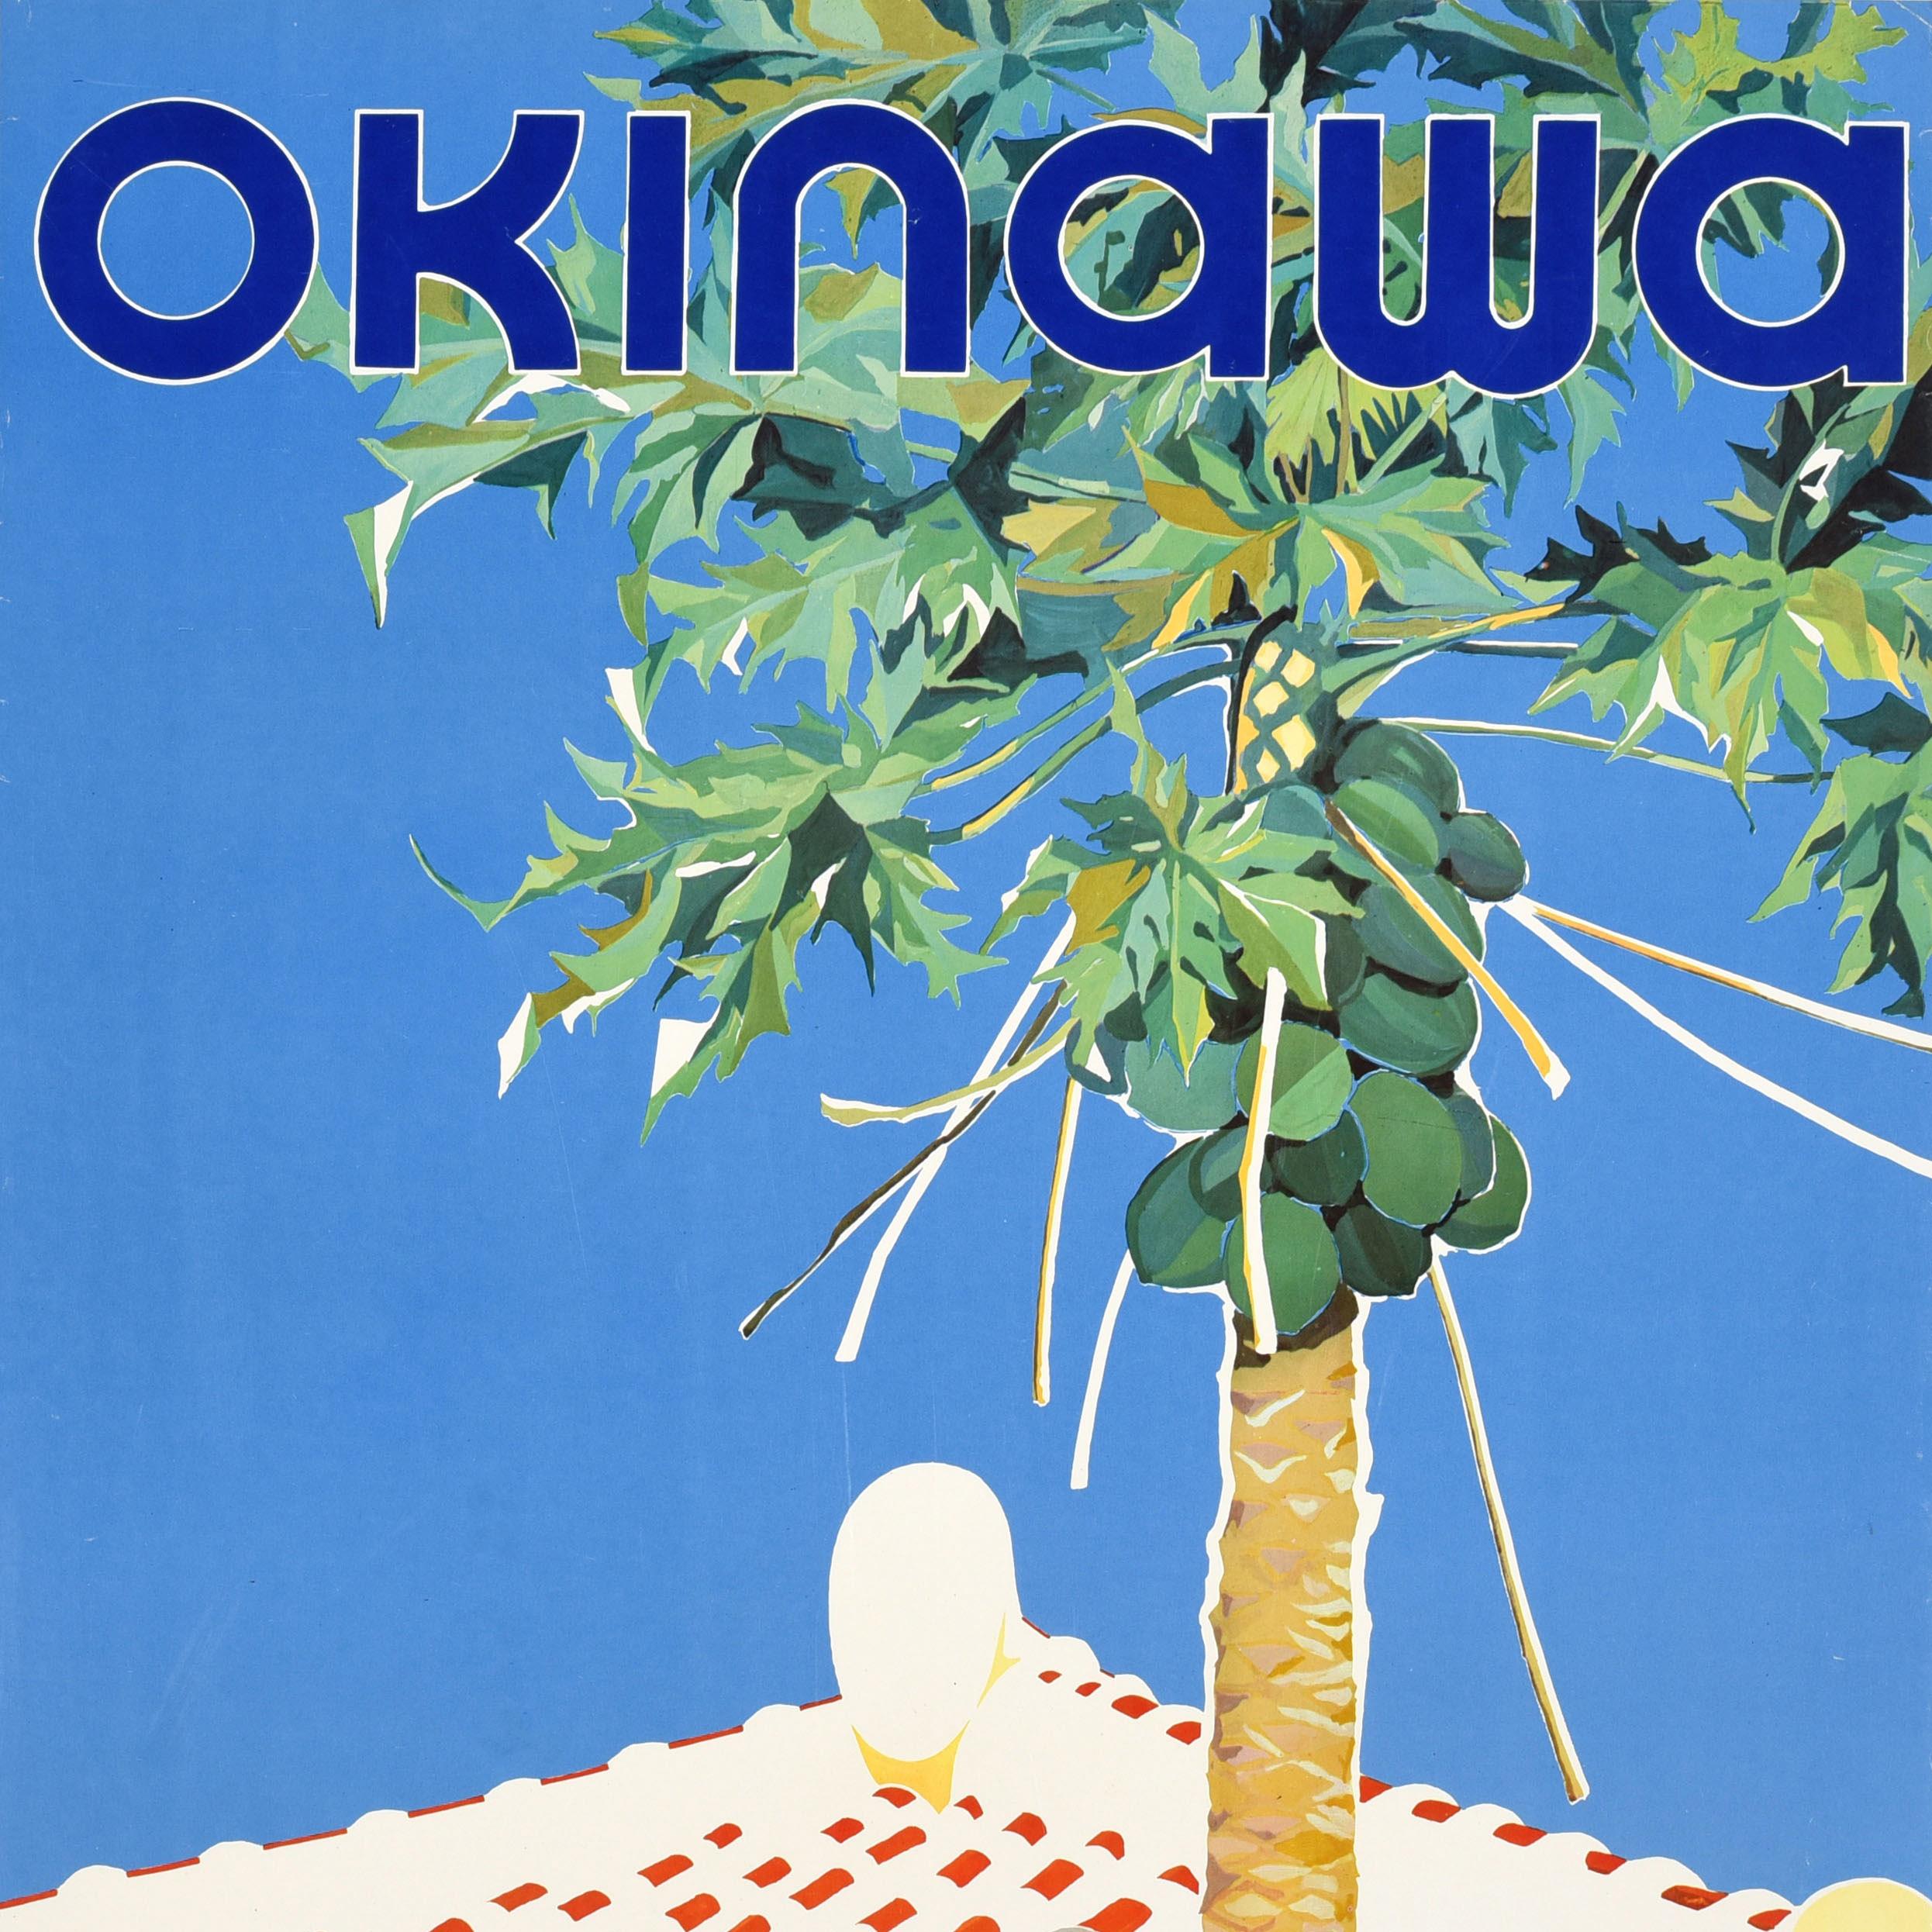 Original vintage Japan travel poster for Okinawa 沖縄 issued by the Naha City Commerce and Tourism Division featuring a great design depicting the red and white roof tiles of the historic Shuri Castle with a tree in the foreground against a blue